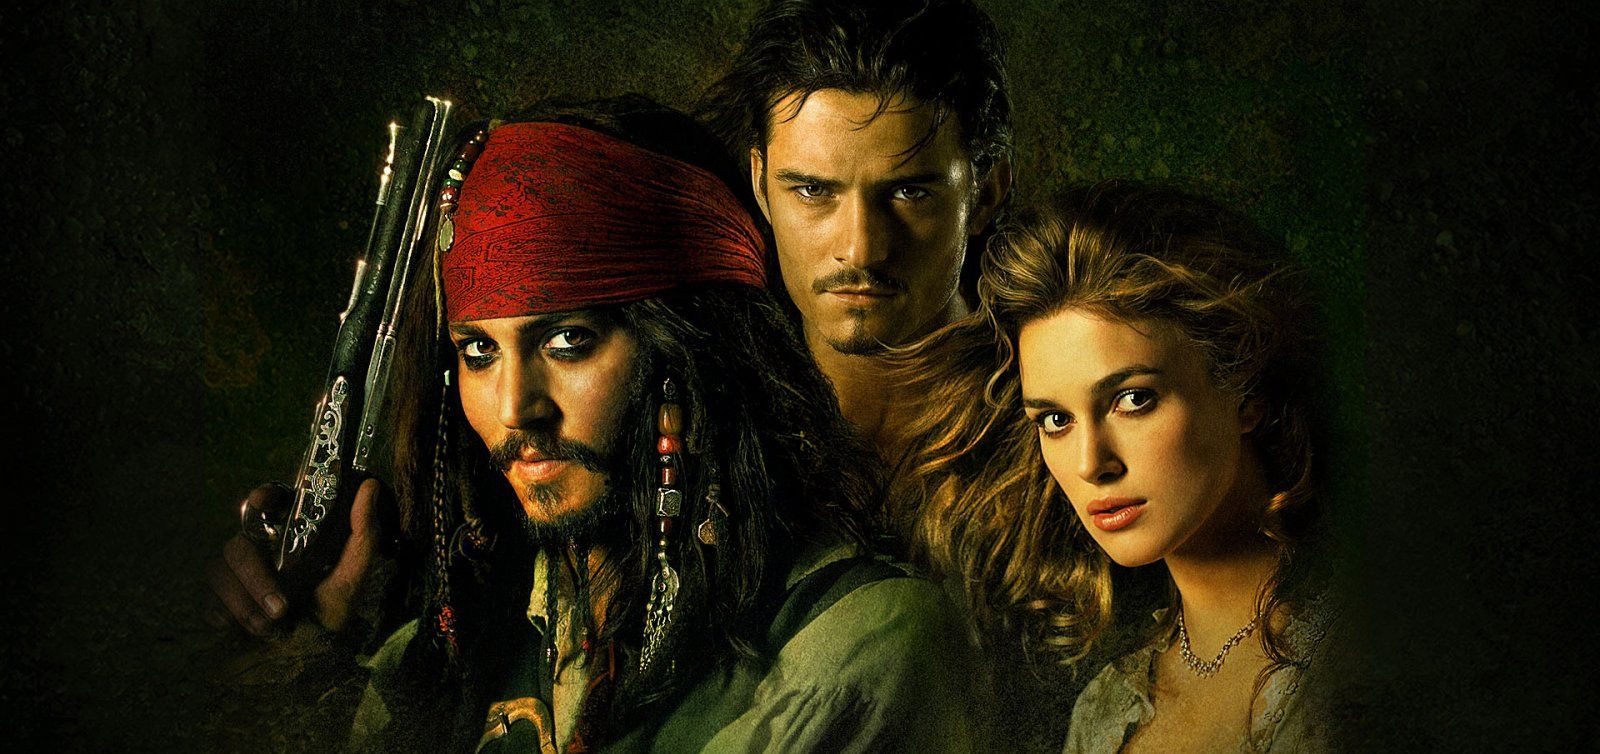 Jerry Bruckheimer hopes 'Pirates of the Carribbean 5' will start filming early 2015